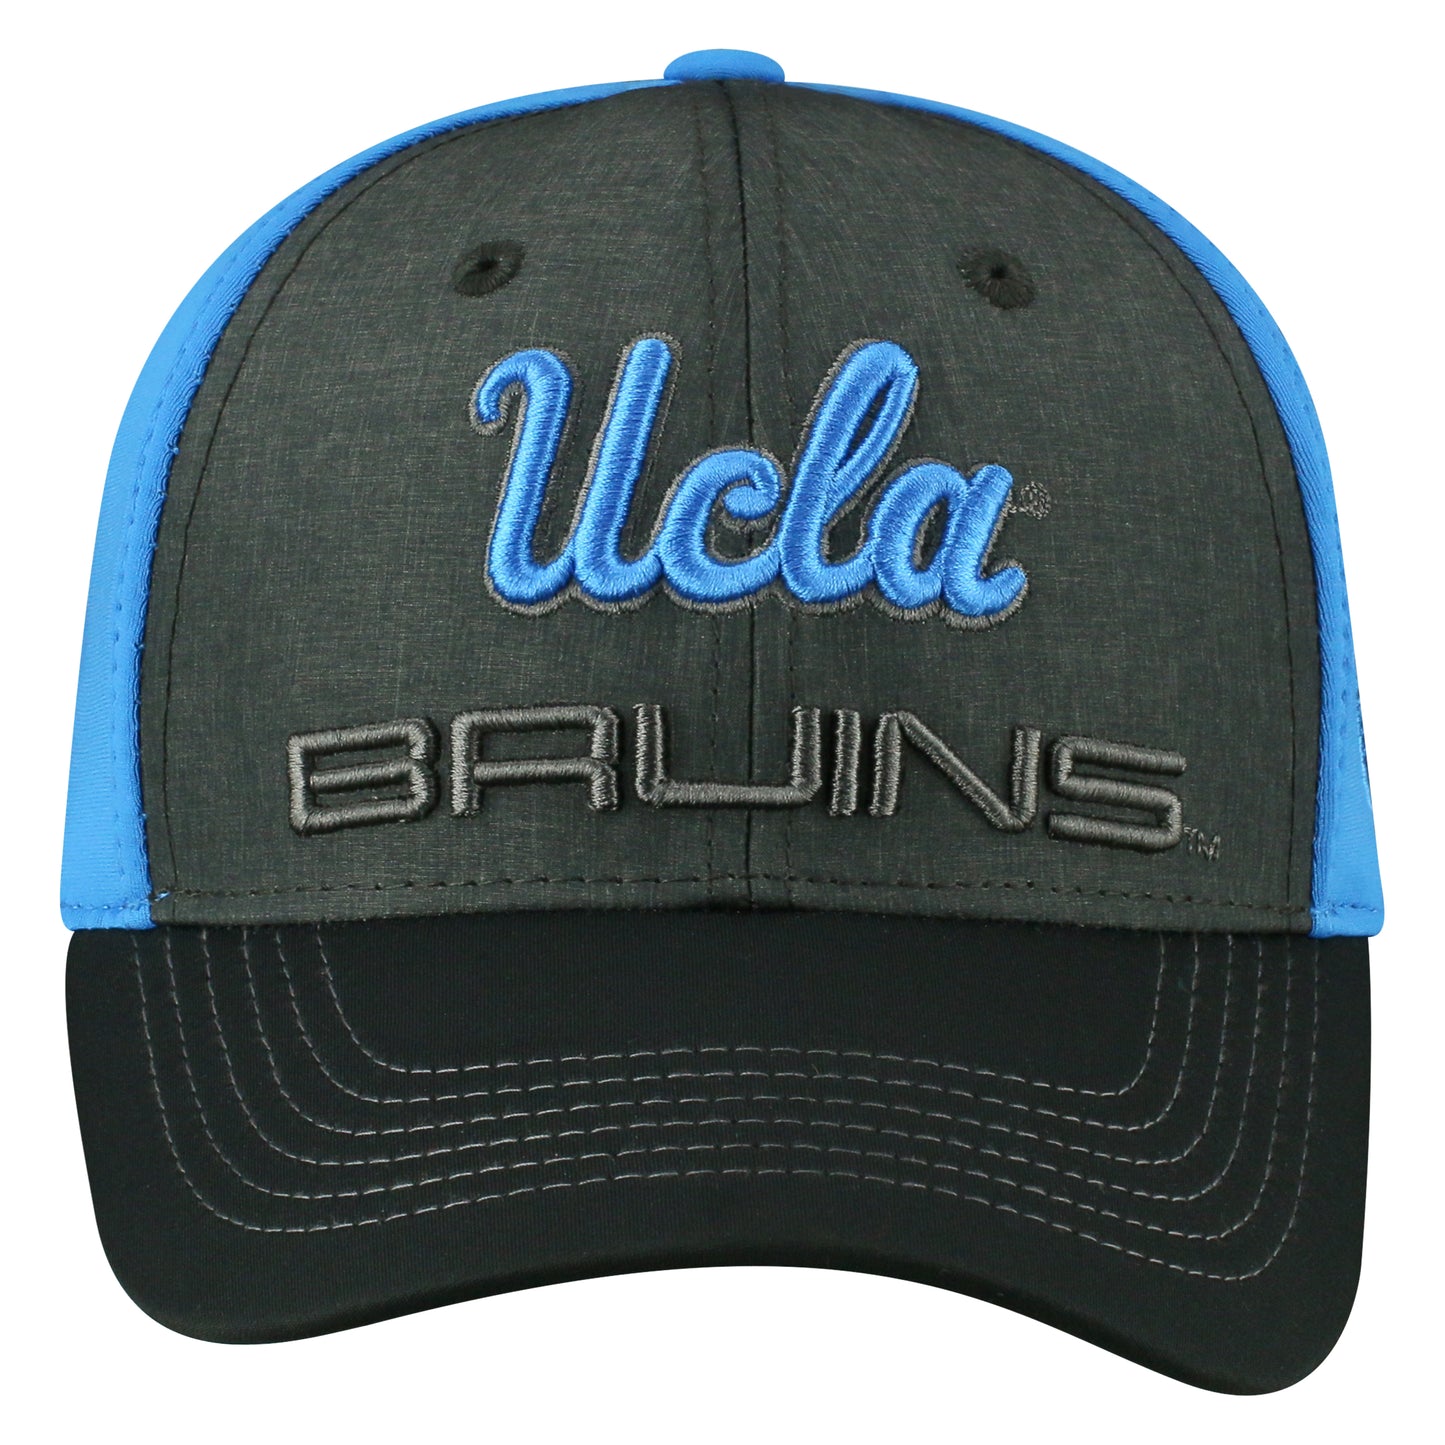 Mens UCLA Bruins Reach One Fit Flex Fit Hat By Top Of The World